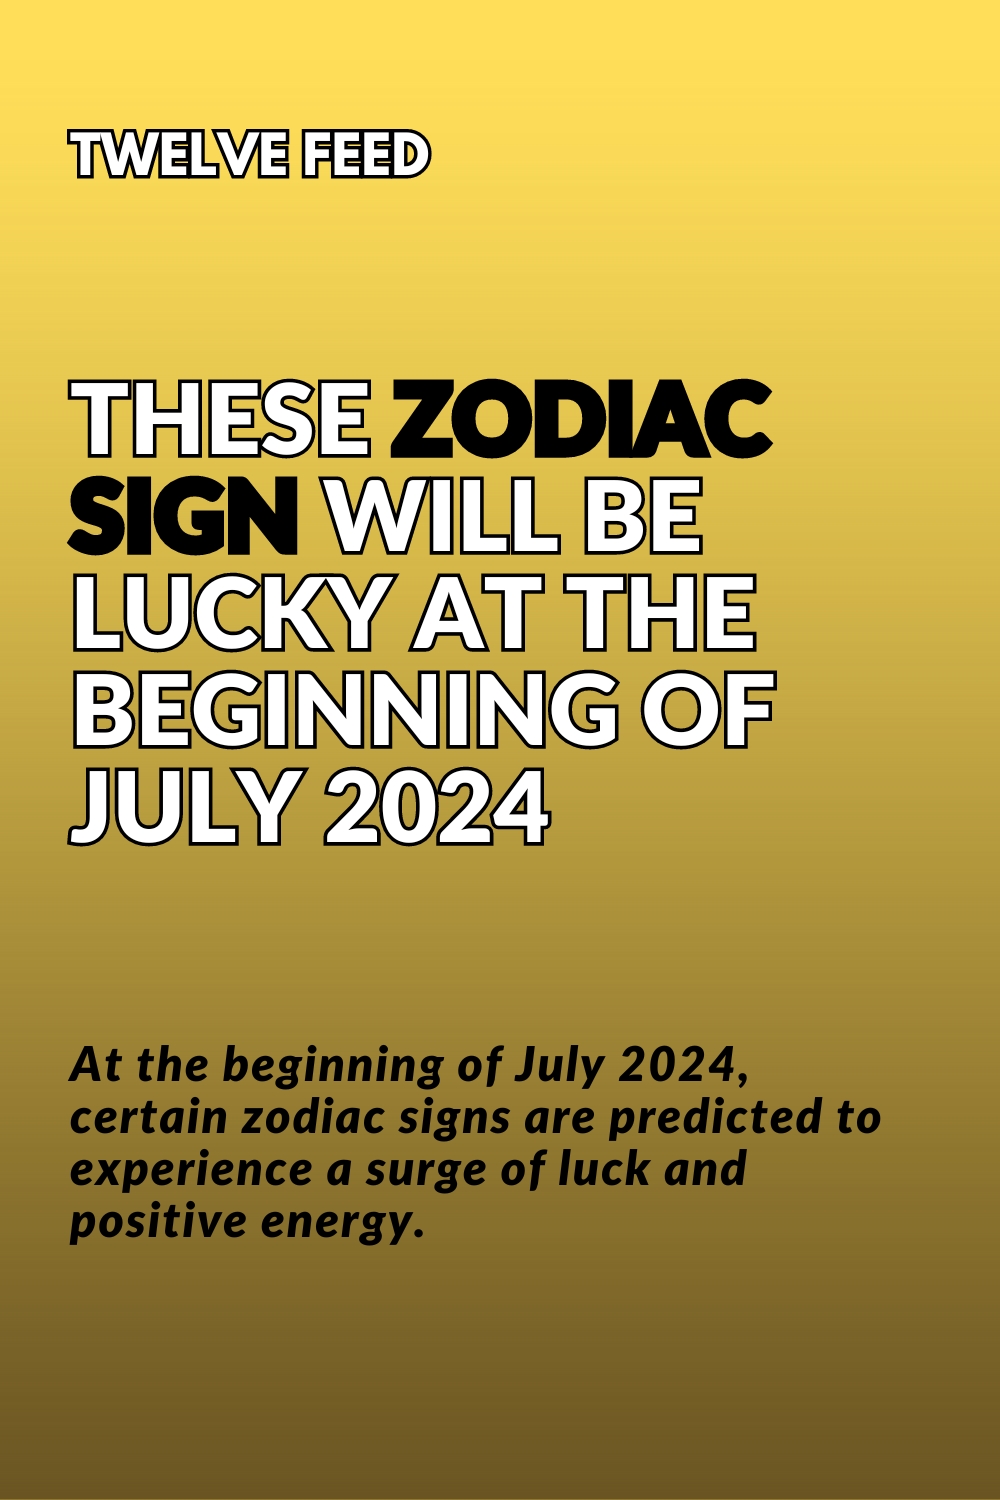 These Zodiac Sign Will Be Lucky At The Beginning Of July 2024